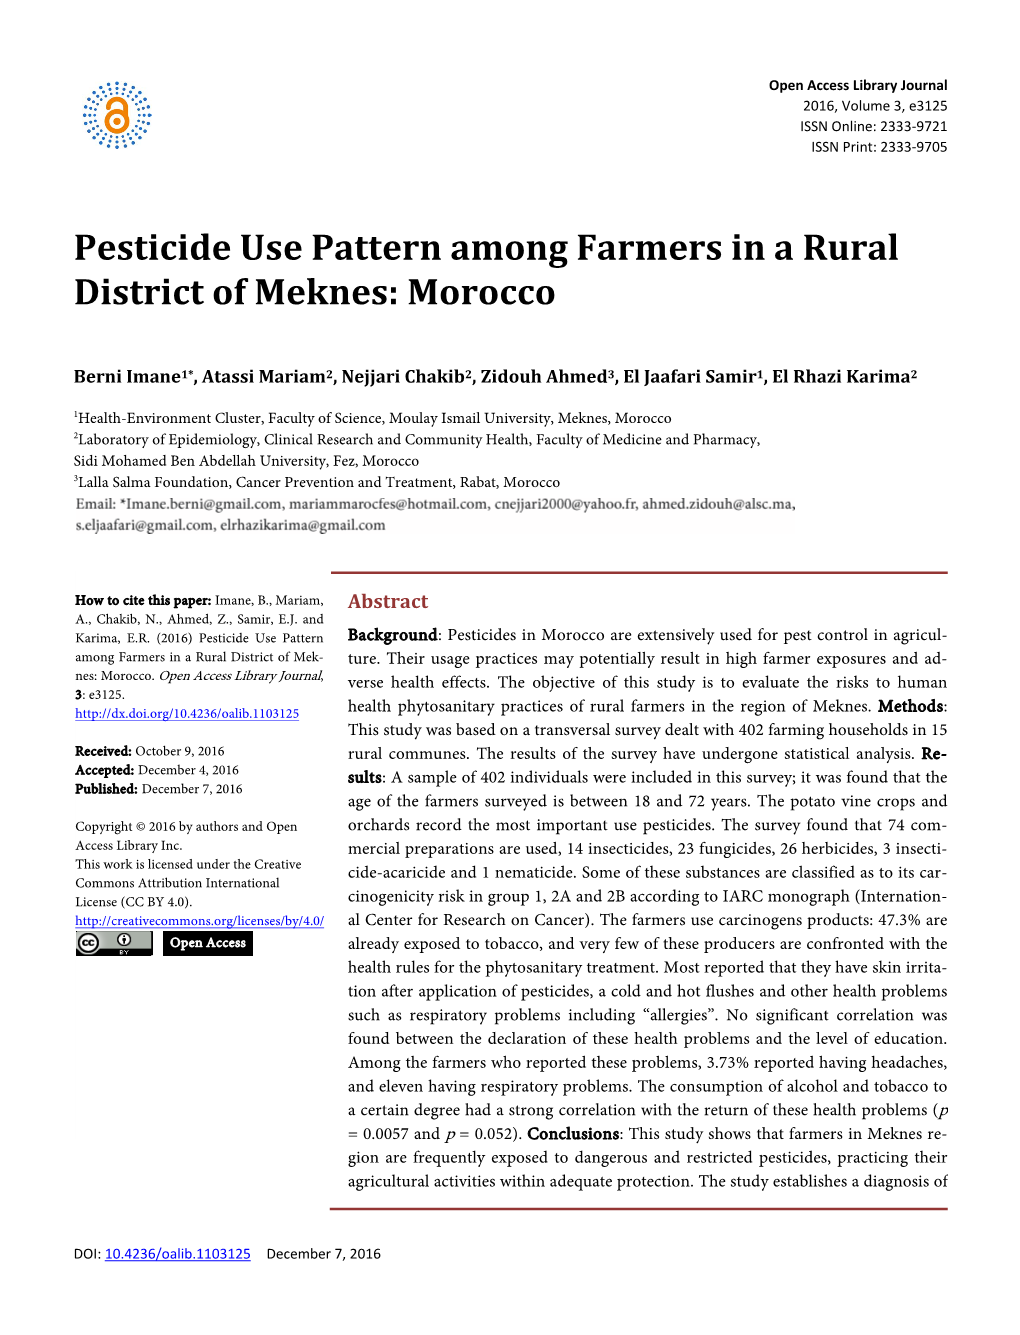 Pesticide Use Pattern Among Farmers in a Rural District of Meknes: Morocco